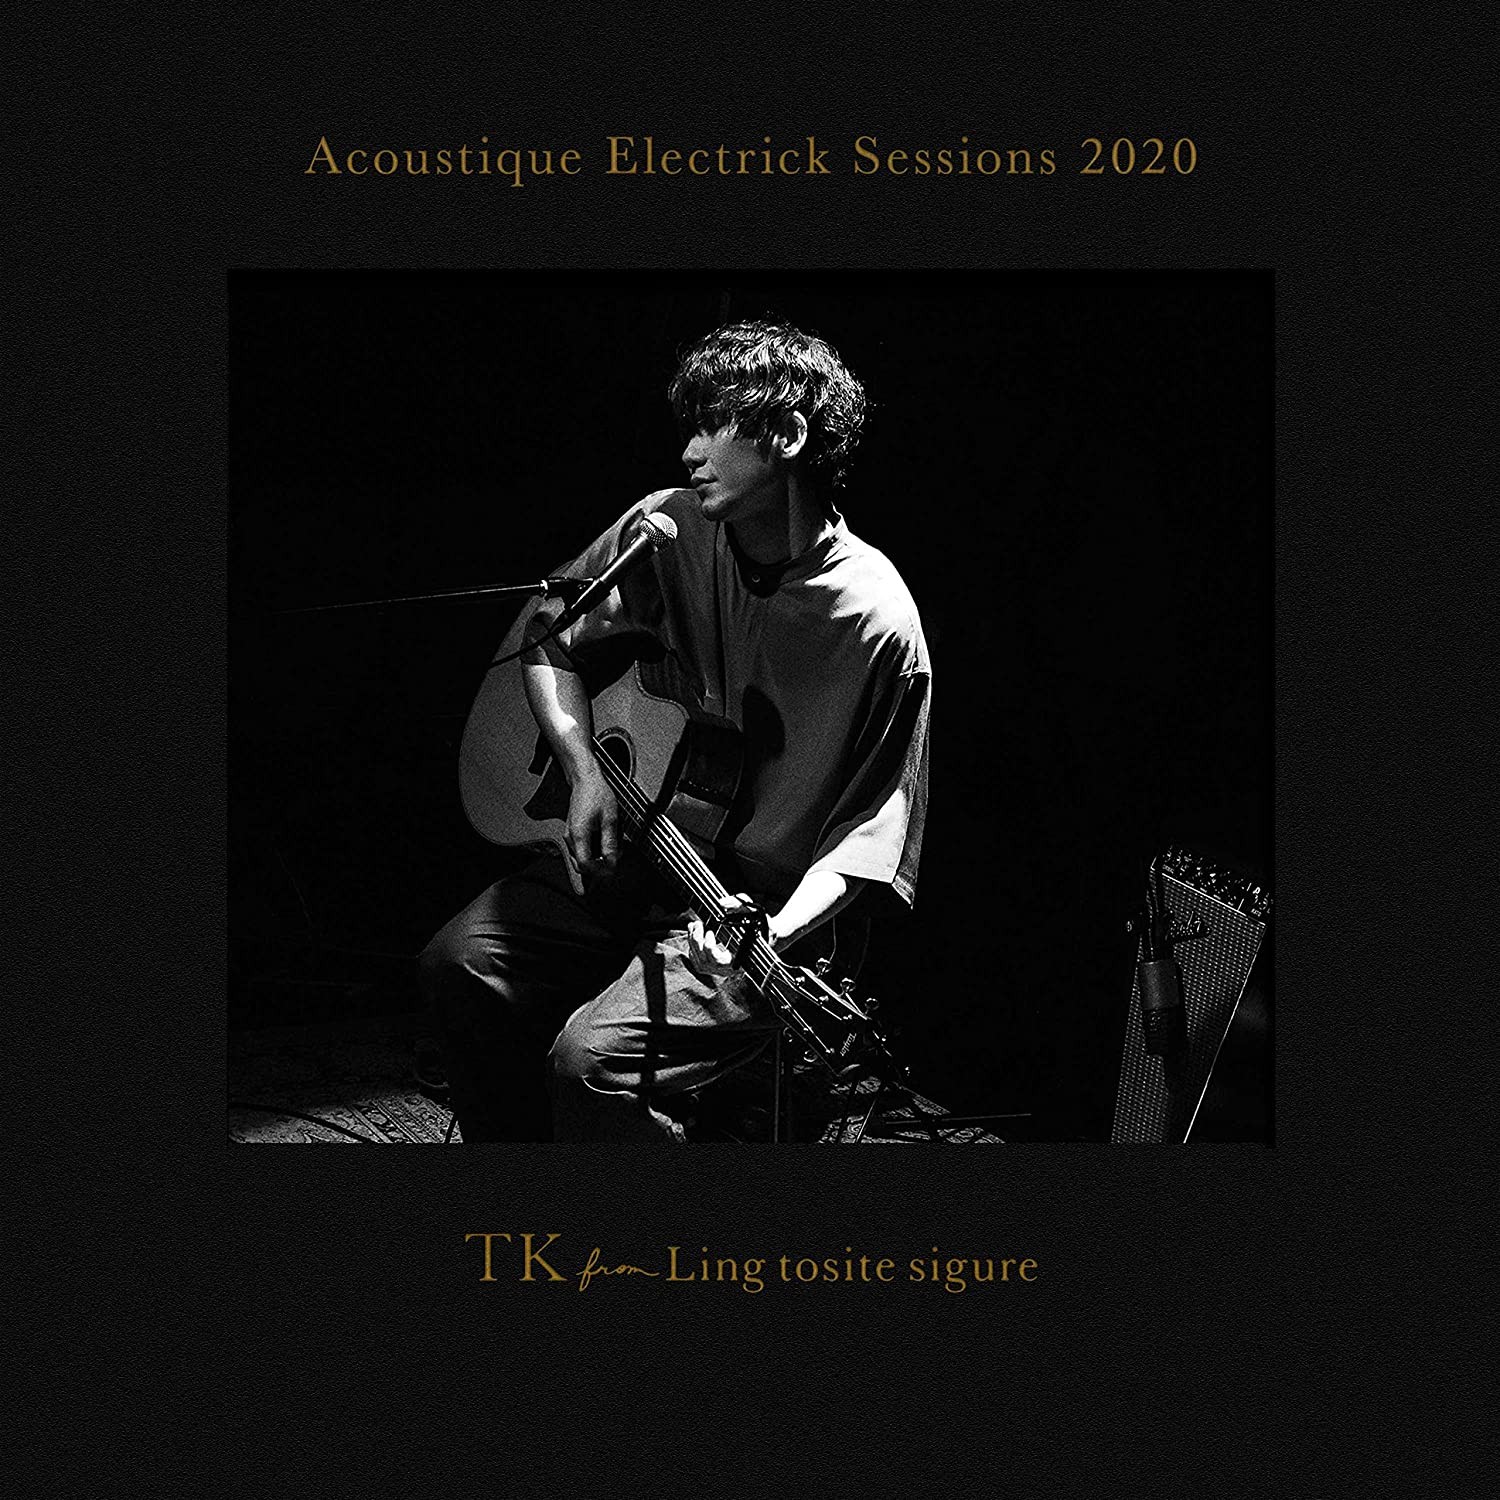 TK from 凛として時雨 (TK from Ling tosite sigure) - Acoustique Electrick Sessions 2020 [CD FLAC + Blu-ray ISO] [2021.04.14]